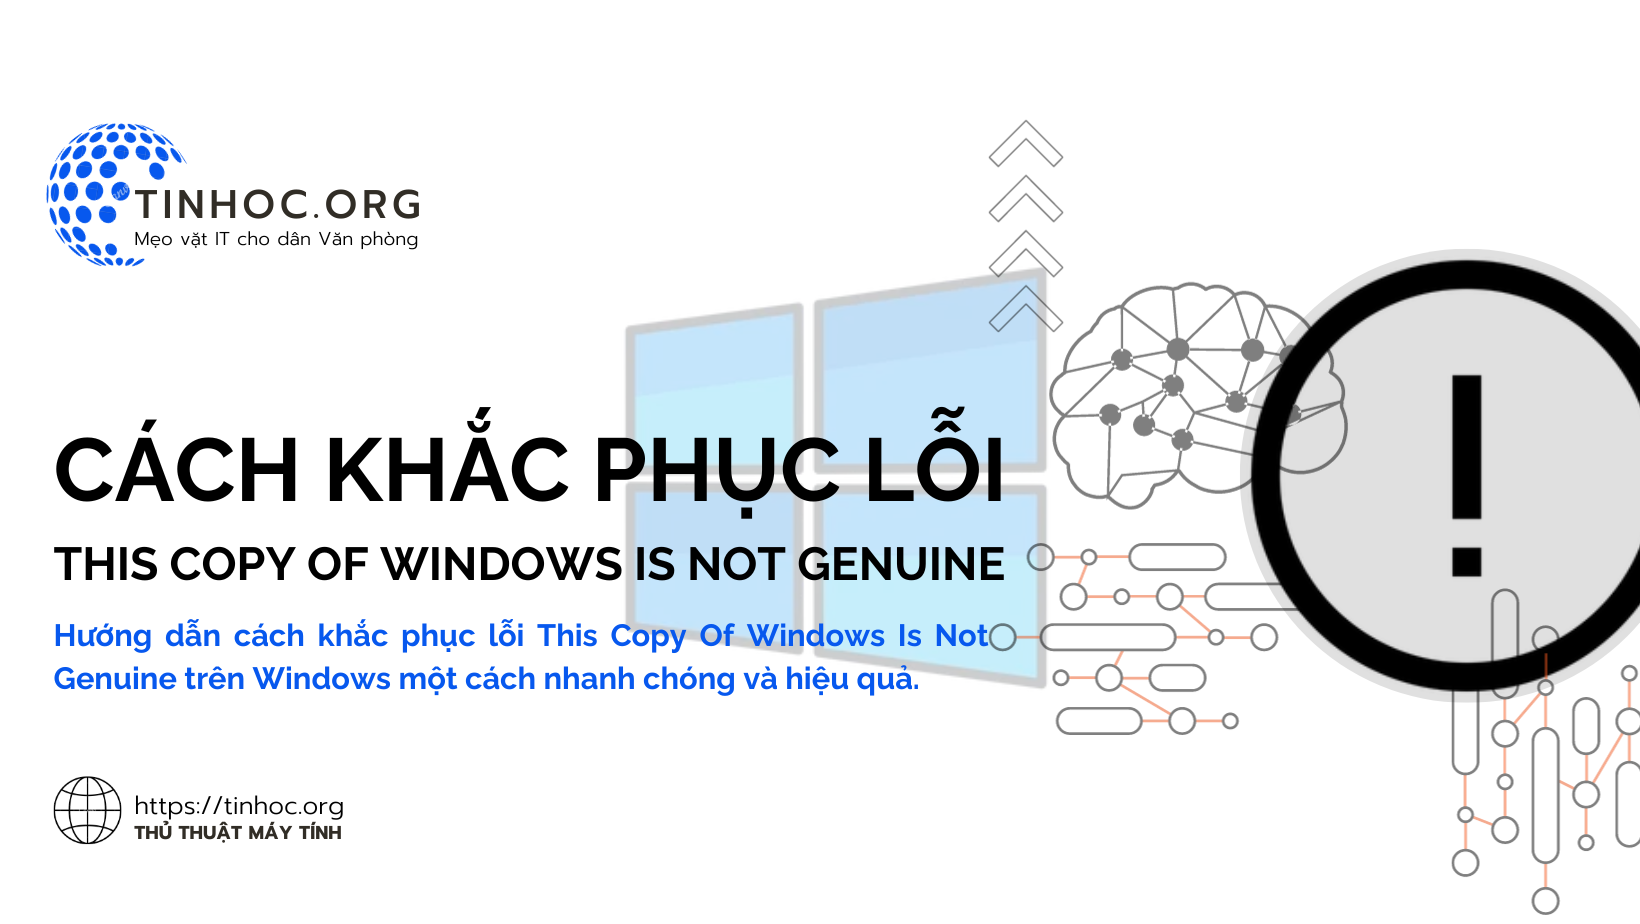 Cách khắc phục lỗi This Copy Of Windows Is Not Genuine